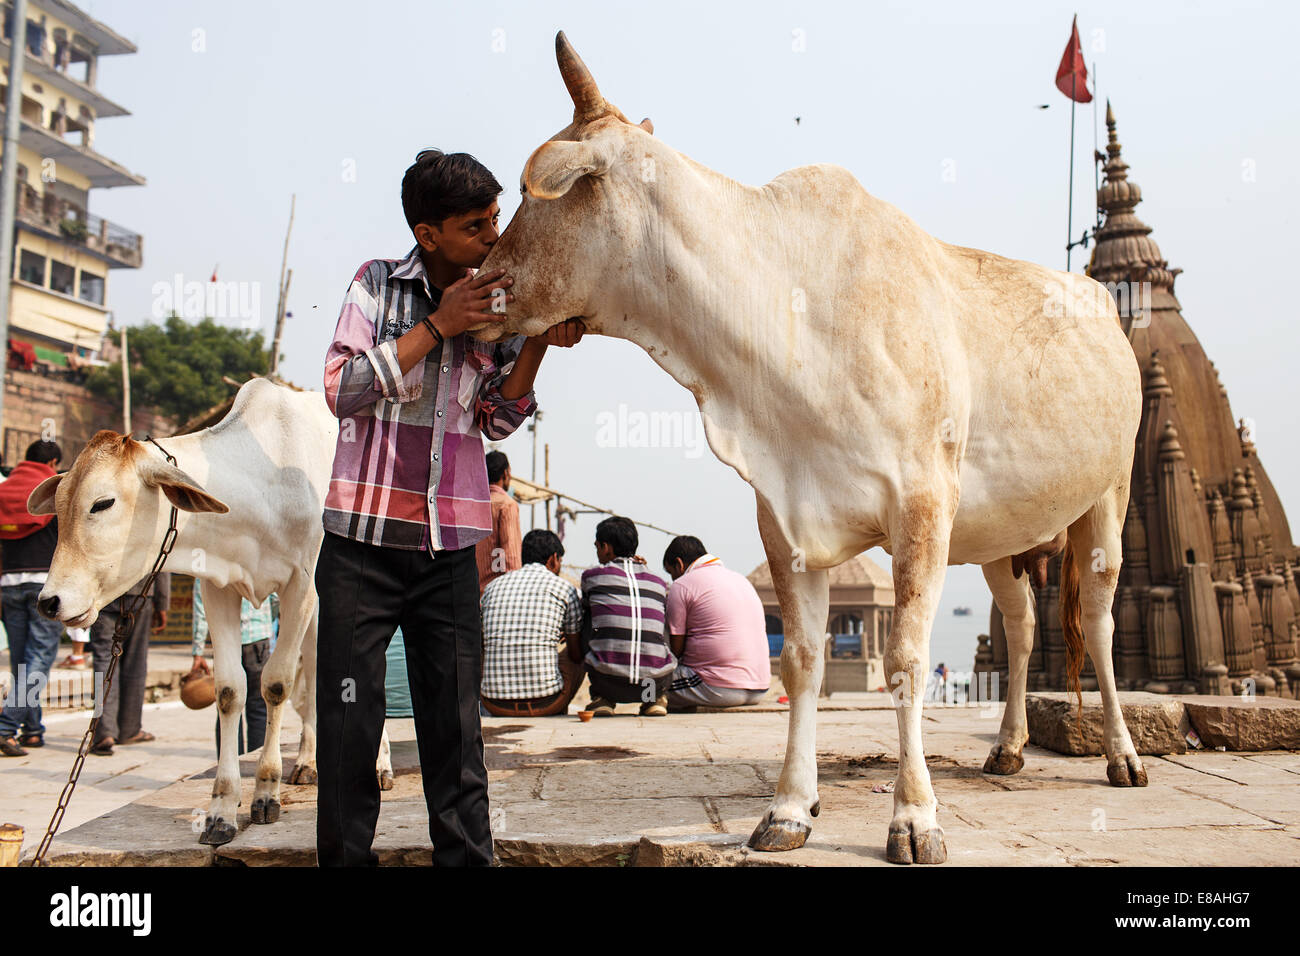 A young man kisses a white cow at one of the Ganges ghats in Varansi, India. Stock Photo